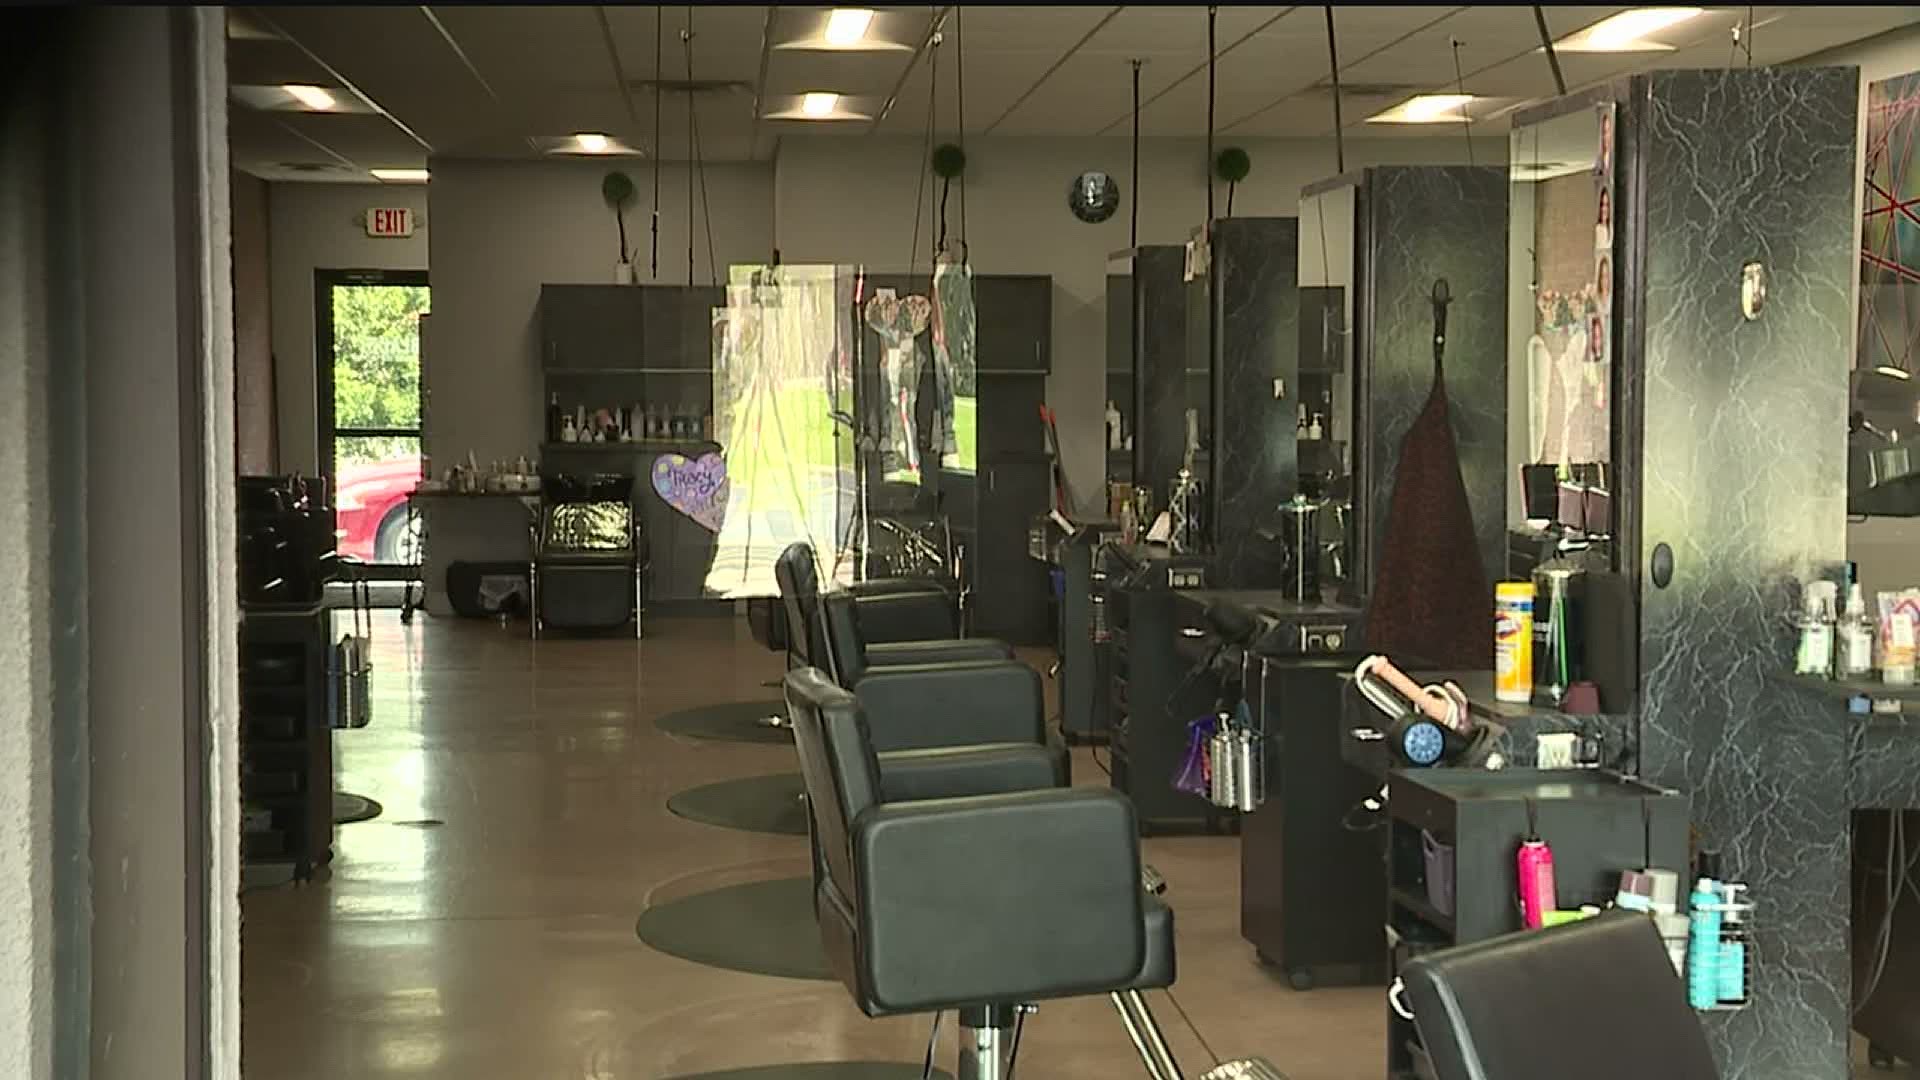 Blades Fifth Avenue Hair Sculpture has been closed for a month and a half. Now the owner says she could open as soon as the governor gives the okay.